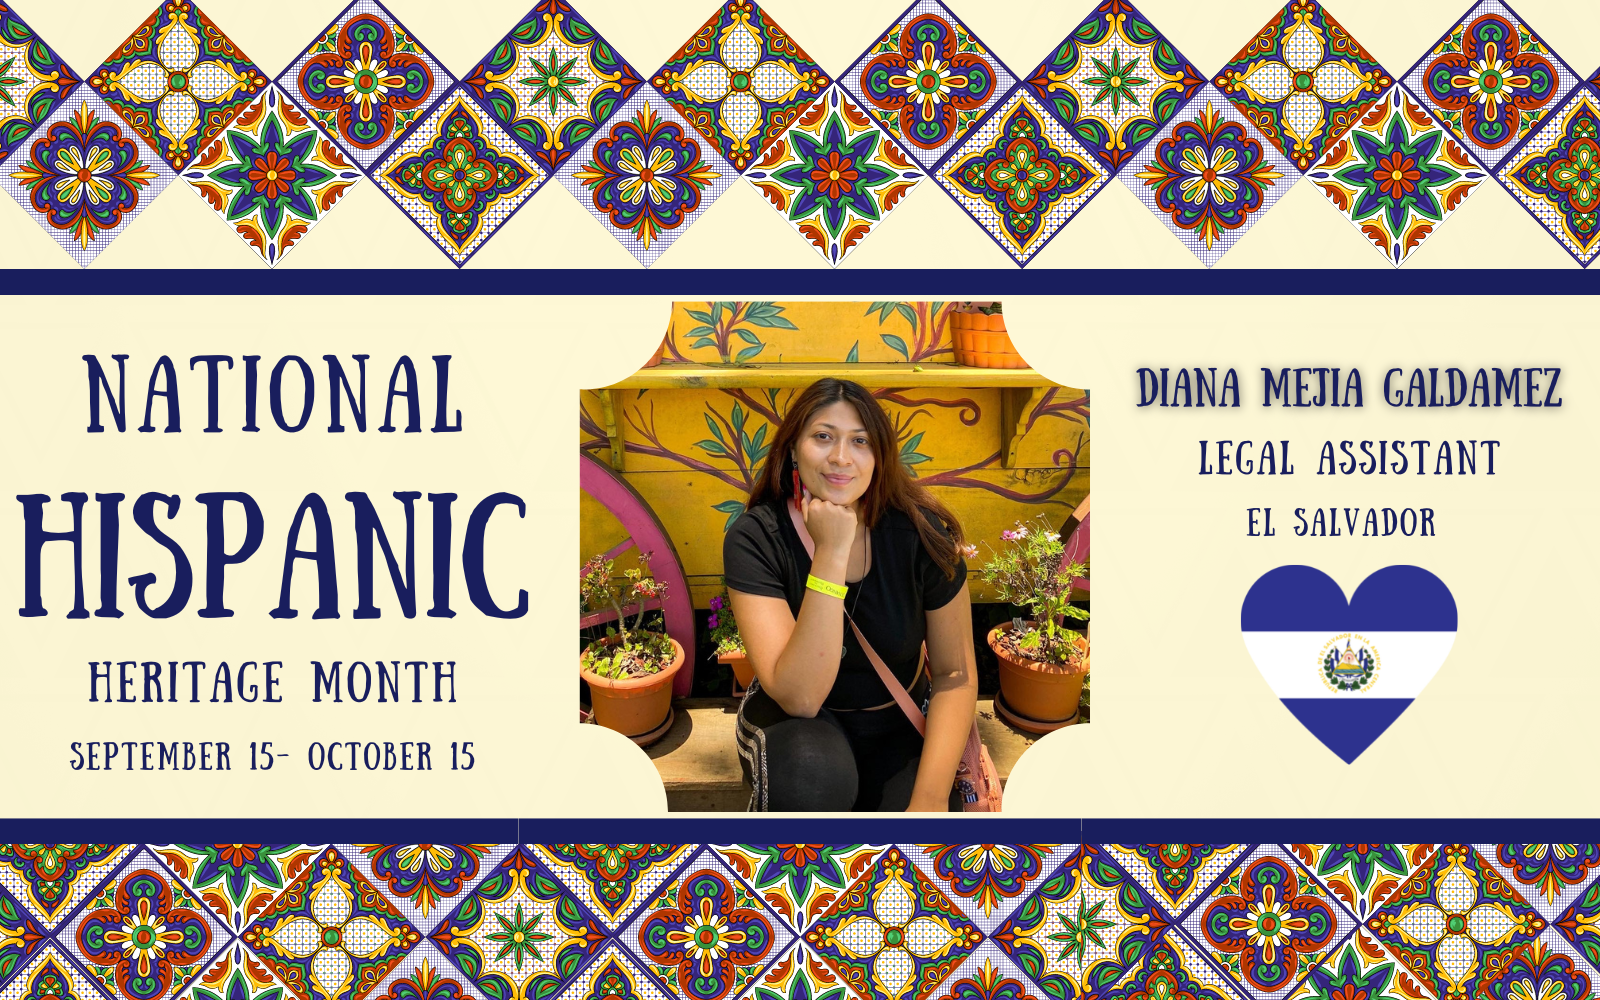 Blog Header for National Hispanic Heritage Month September 15 to October 15. The highlight image is Diana Mejia Galdamez. She is a Legal Assistant at Garvish Immigration Law Group in Atlanta, Georgia. Diana's family immigrated from El Salvador in 1982 and she tells her story in this blog post.